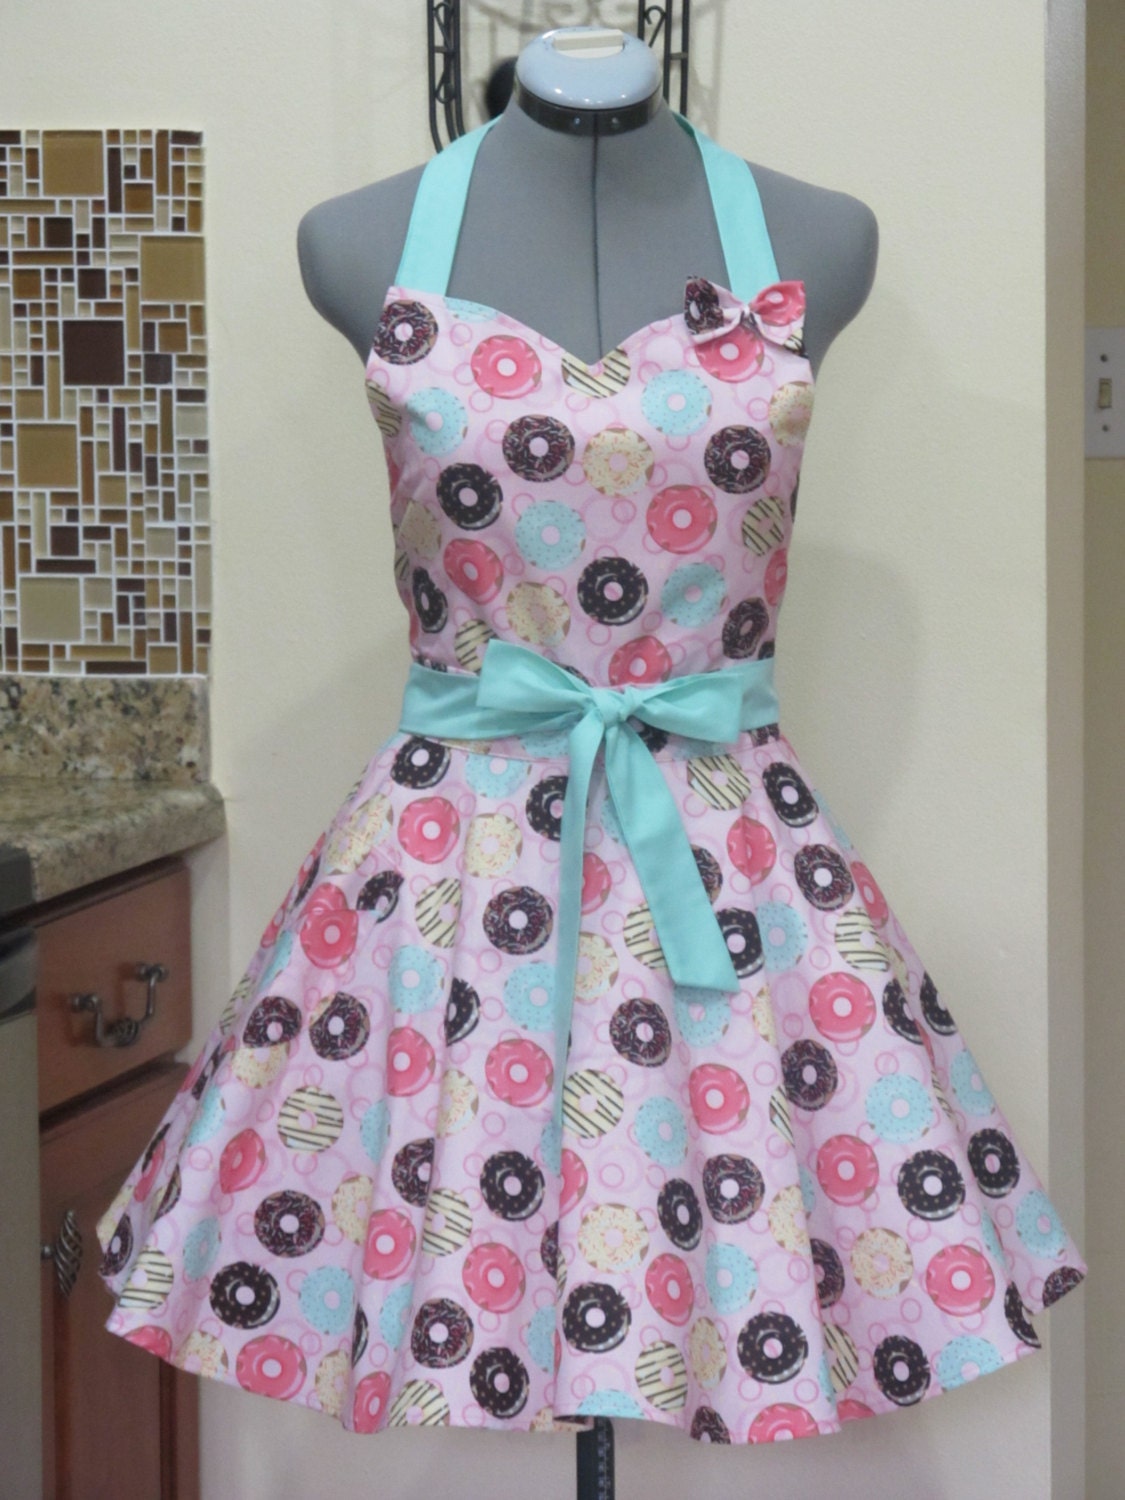 The Sexy Doughnut Shop Pin Up Apron With a cute little bow